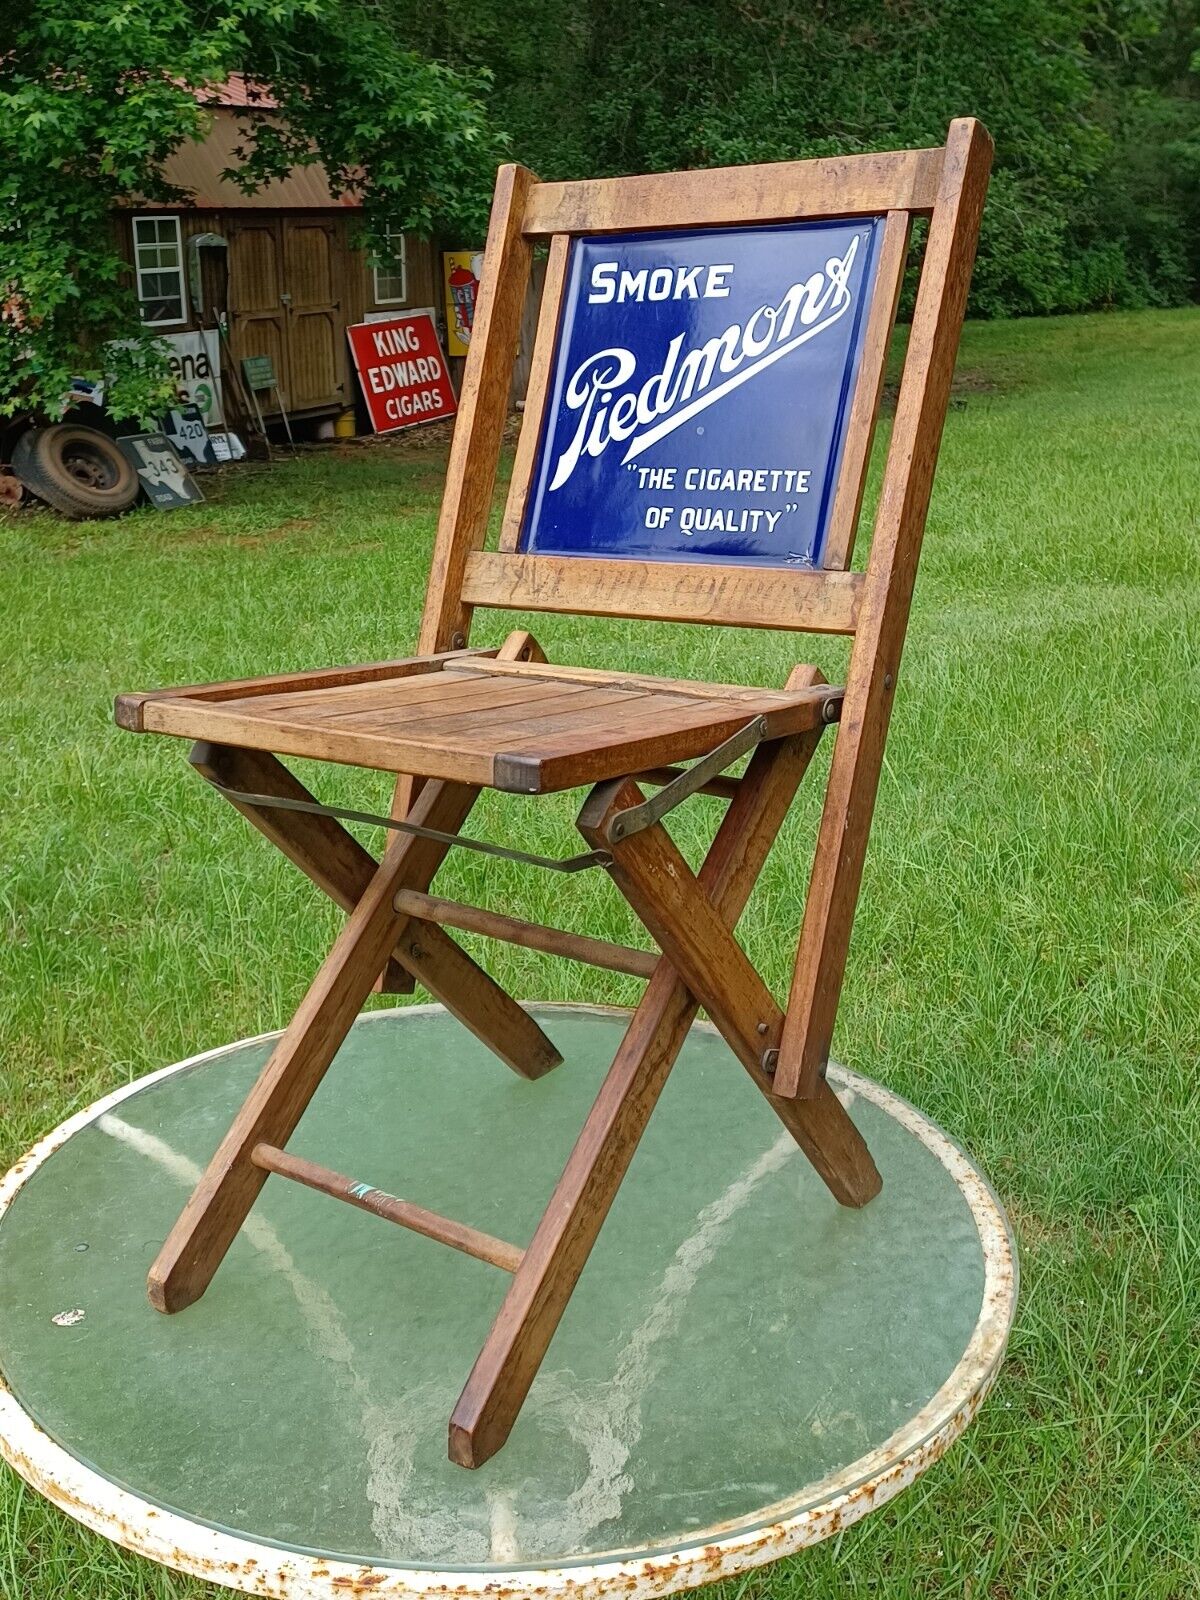 Piedmont Cigarettes Wood Folding Chair With Double Sided Porcelain Sign